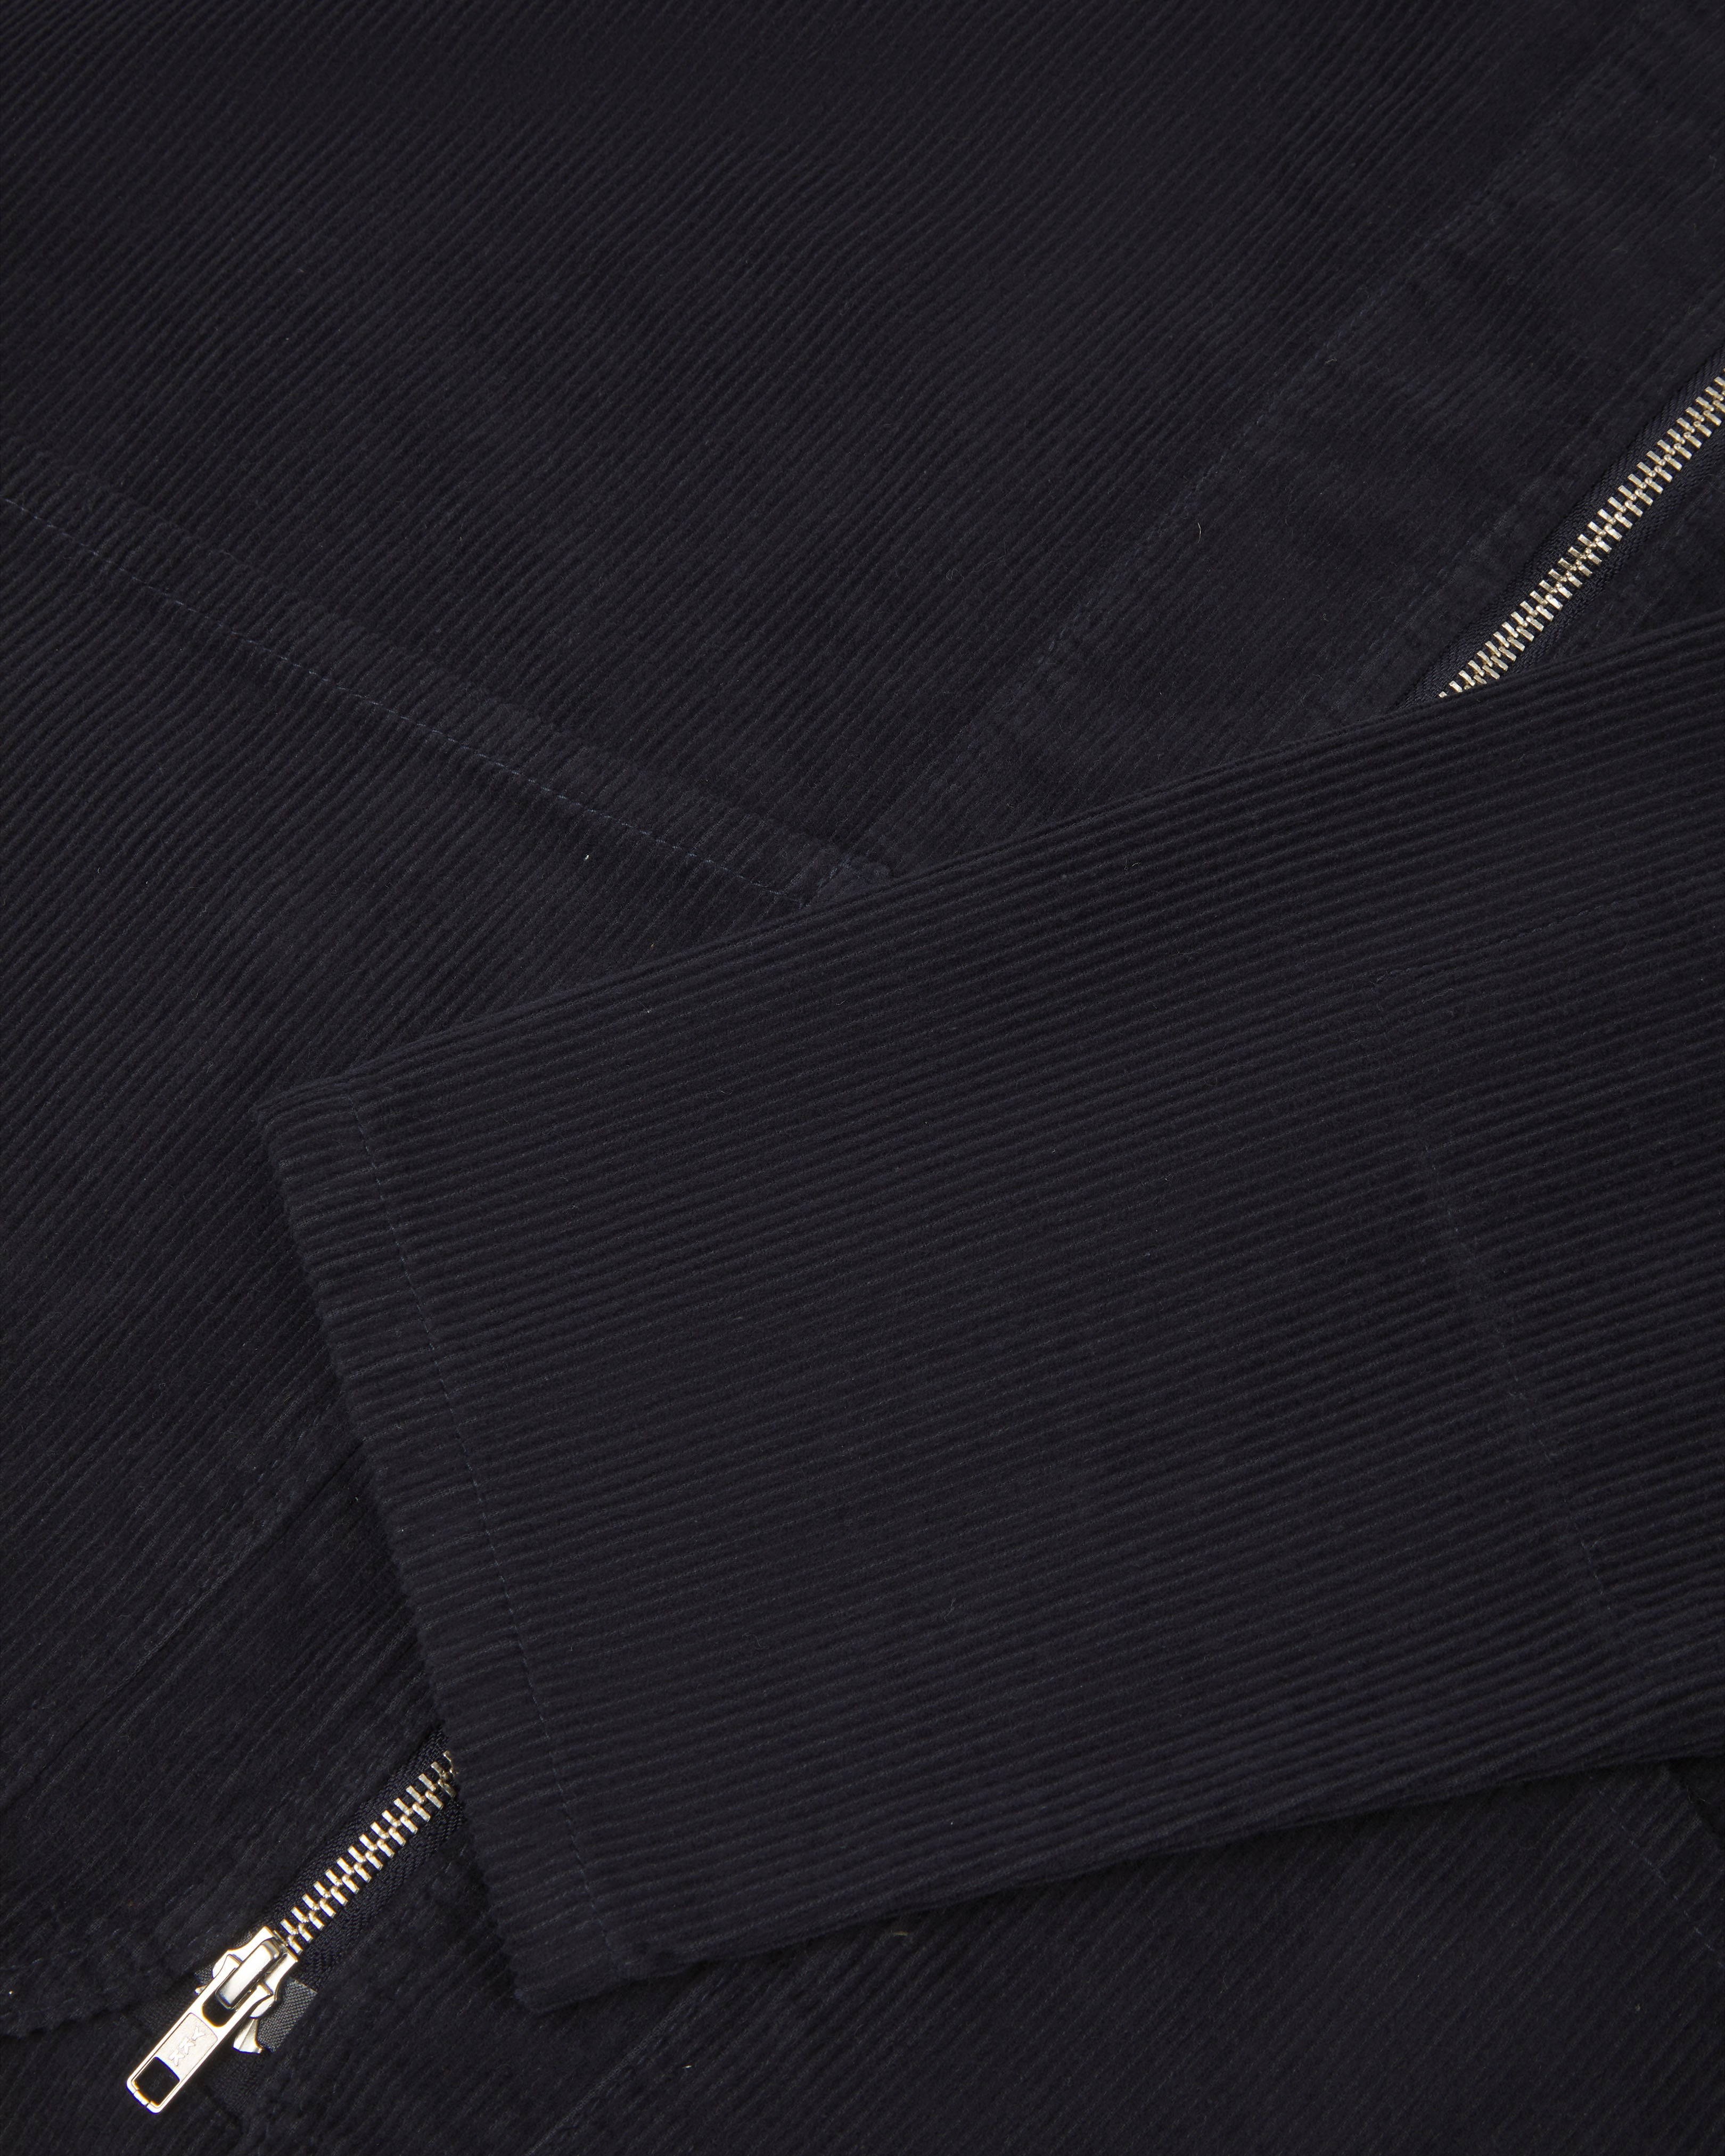 front flat shot of uskees collarless zip front jacket in dark blue corduroy showing the cuff/sleeve in close-up